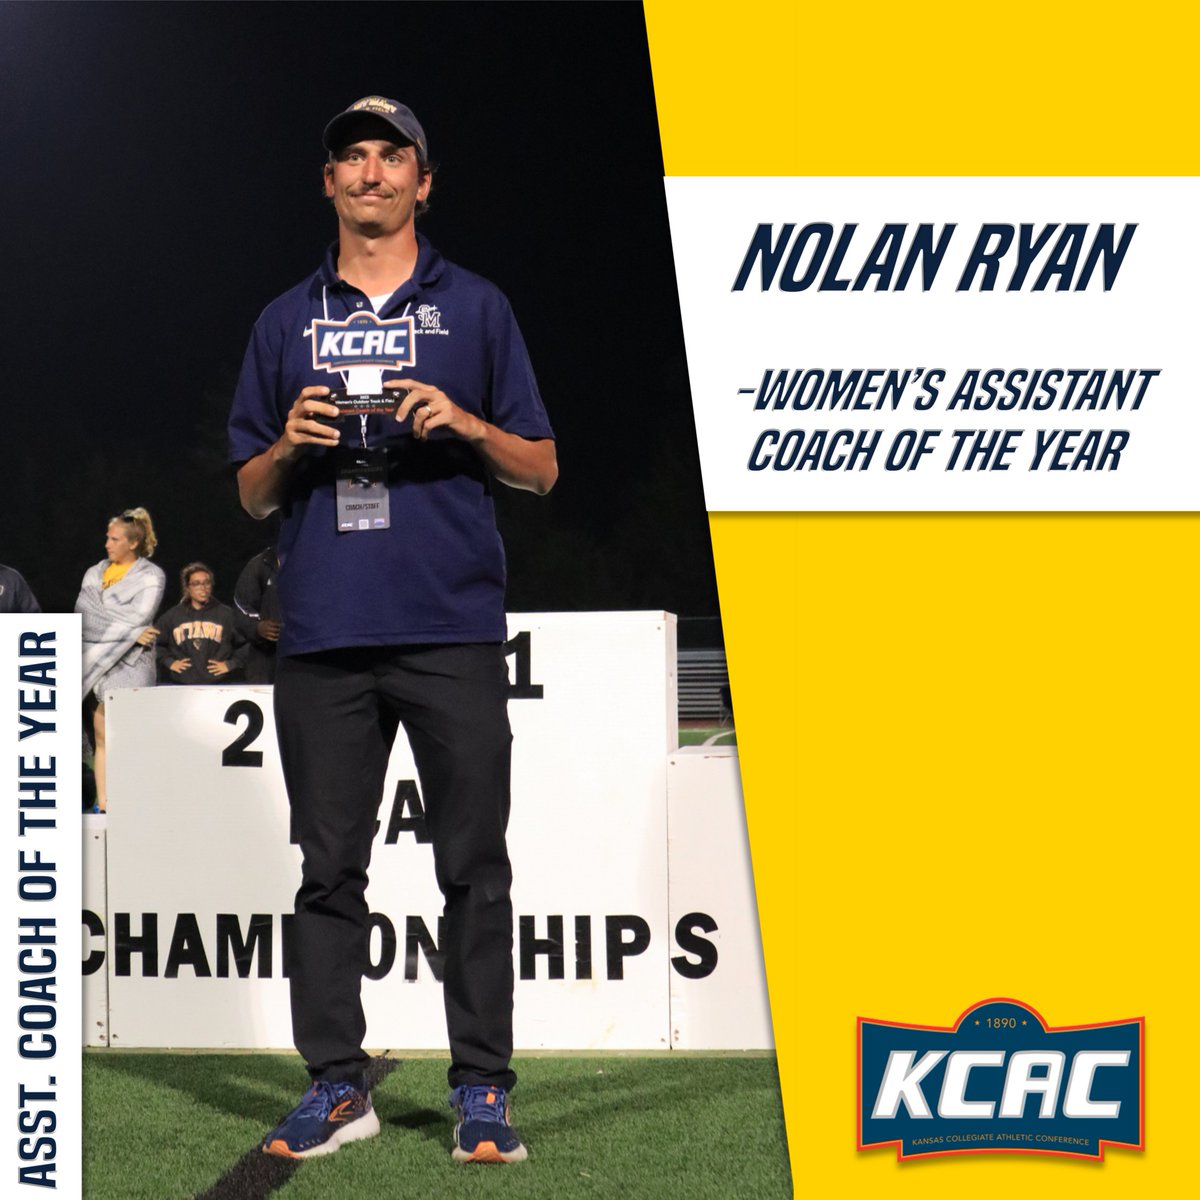 🏆Assistant Coach Nolan Ryan was named the KCAC Outdoor Track & Field Women’s Assistant Coach of the Year!! #gospires💫 #trackandfield #coachoftheyear